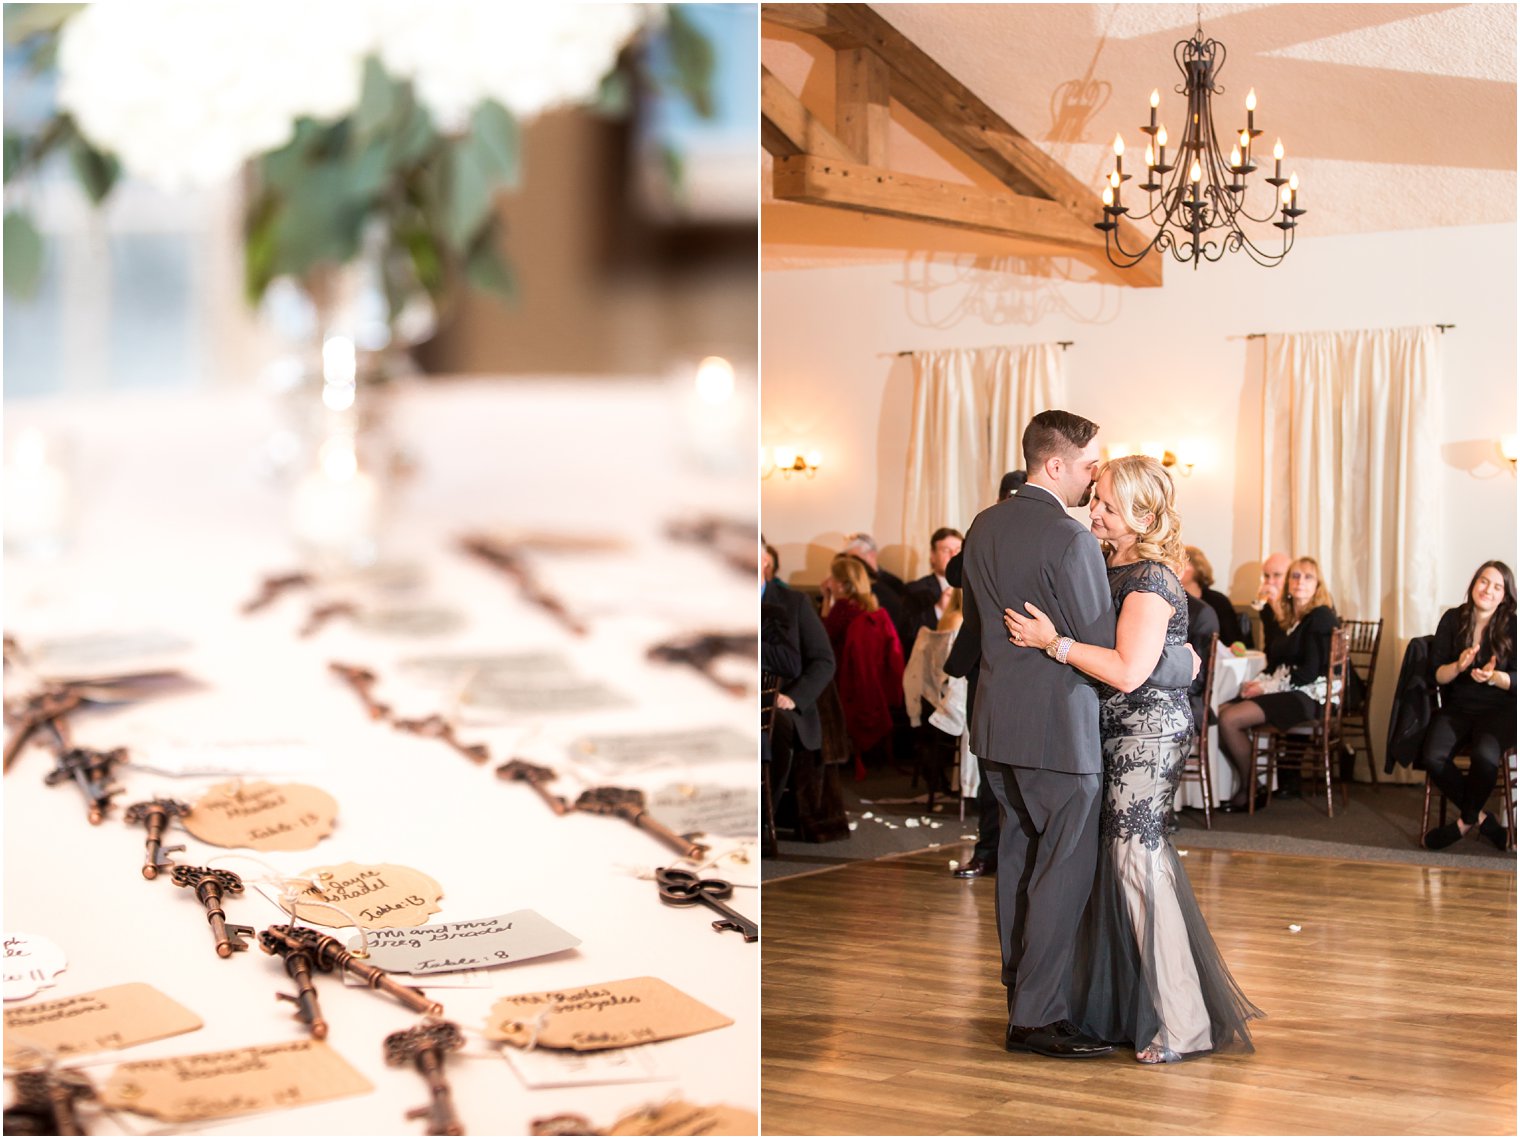 Antique key favors at rustic wedding | Photo by PA Wedding Photographers Idalia Photography